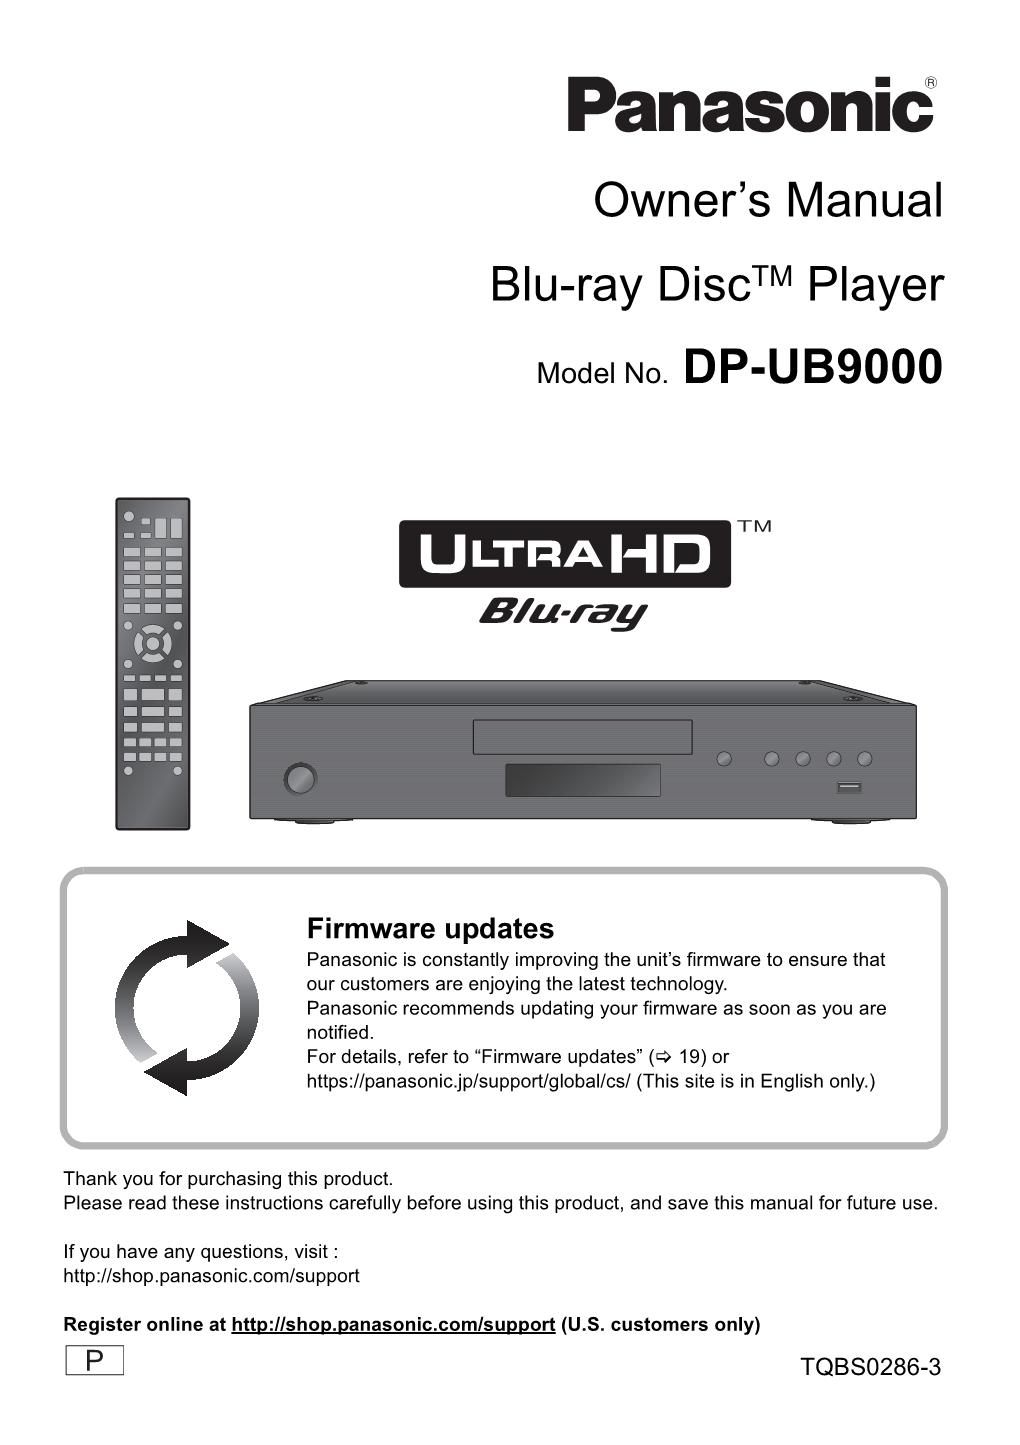 Owner's Manual Blu-Ray Disctm Player